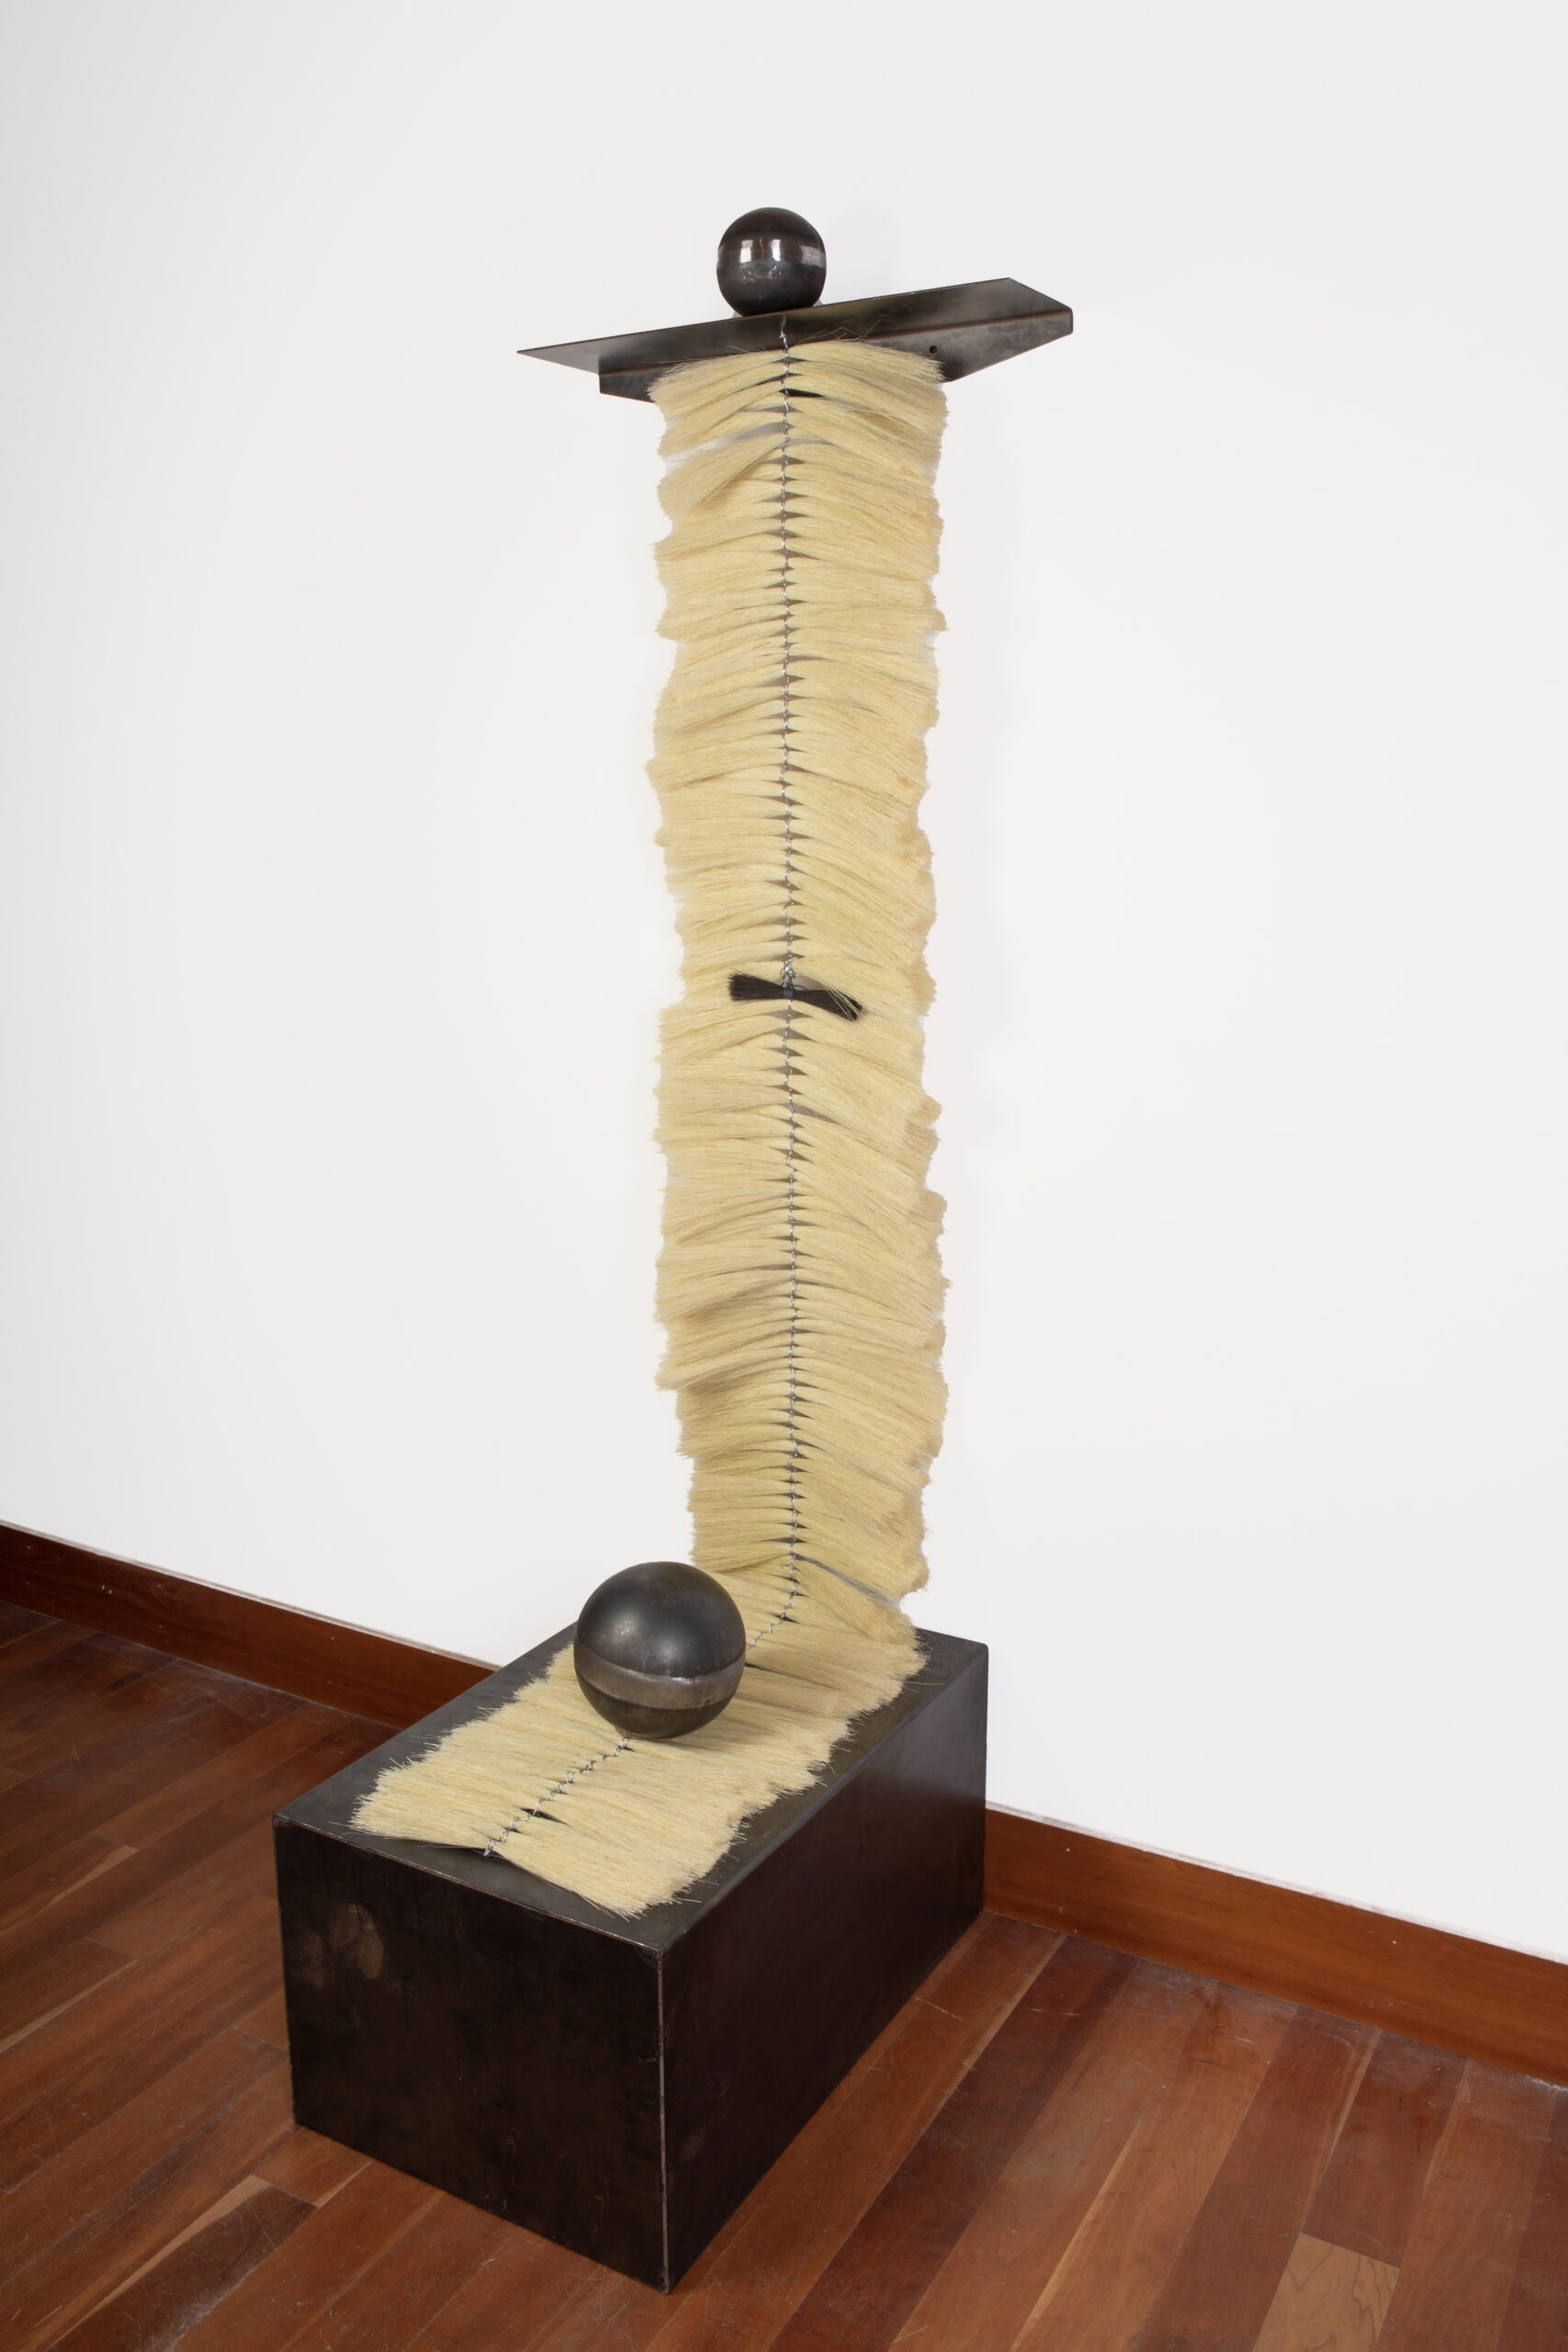 
							

									Elizabeth Hohimer									Totem 4 2023									agave fiber, wire, steel<br />
84 x 30 x 26 inches<br />
sold									


							